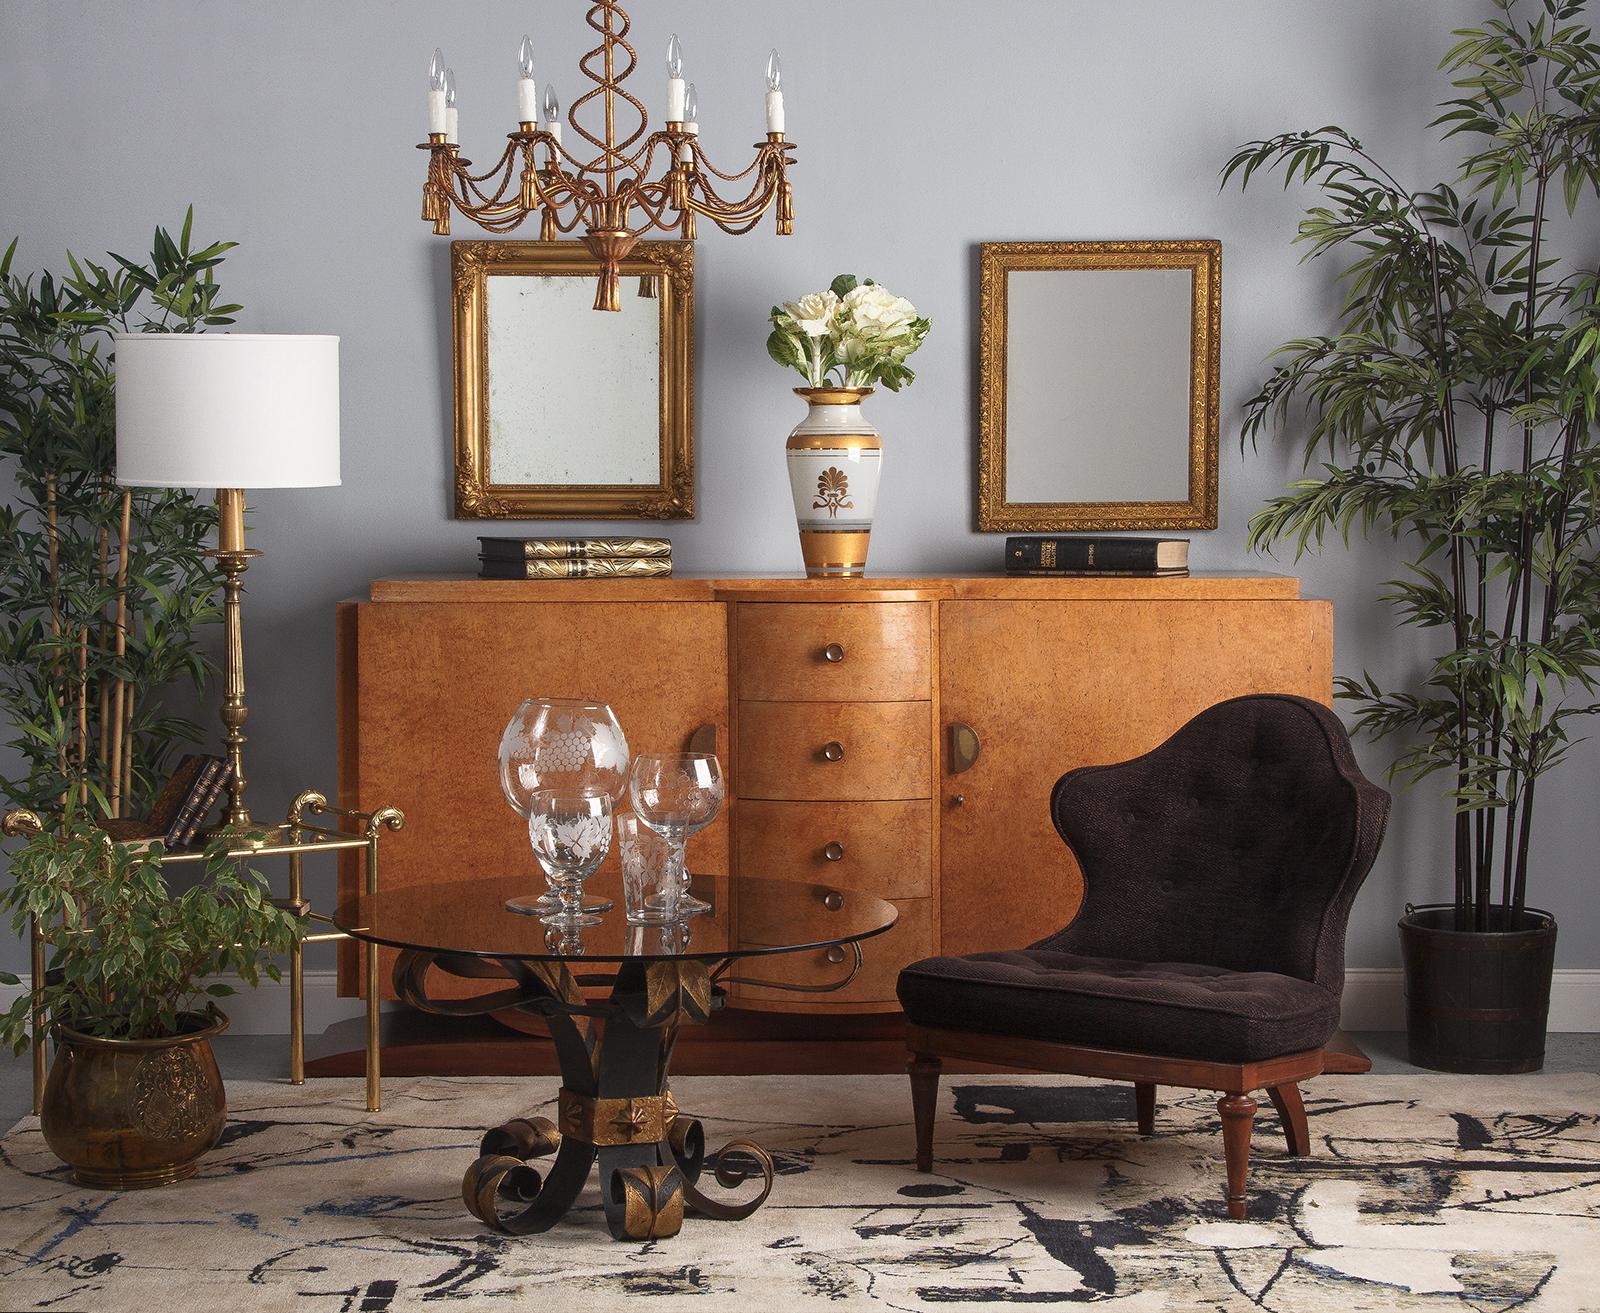 A striking French Art Deco buffet in burl amboyna wood, circa 1930. The gorgeous, exotic amboyna burl wood is light in tone, making the large piece feel light and bright. It rests on a classic Art Deco mahogany base, with a curved edge plinth foot